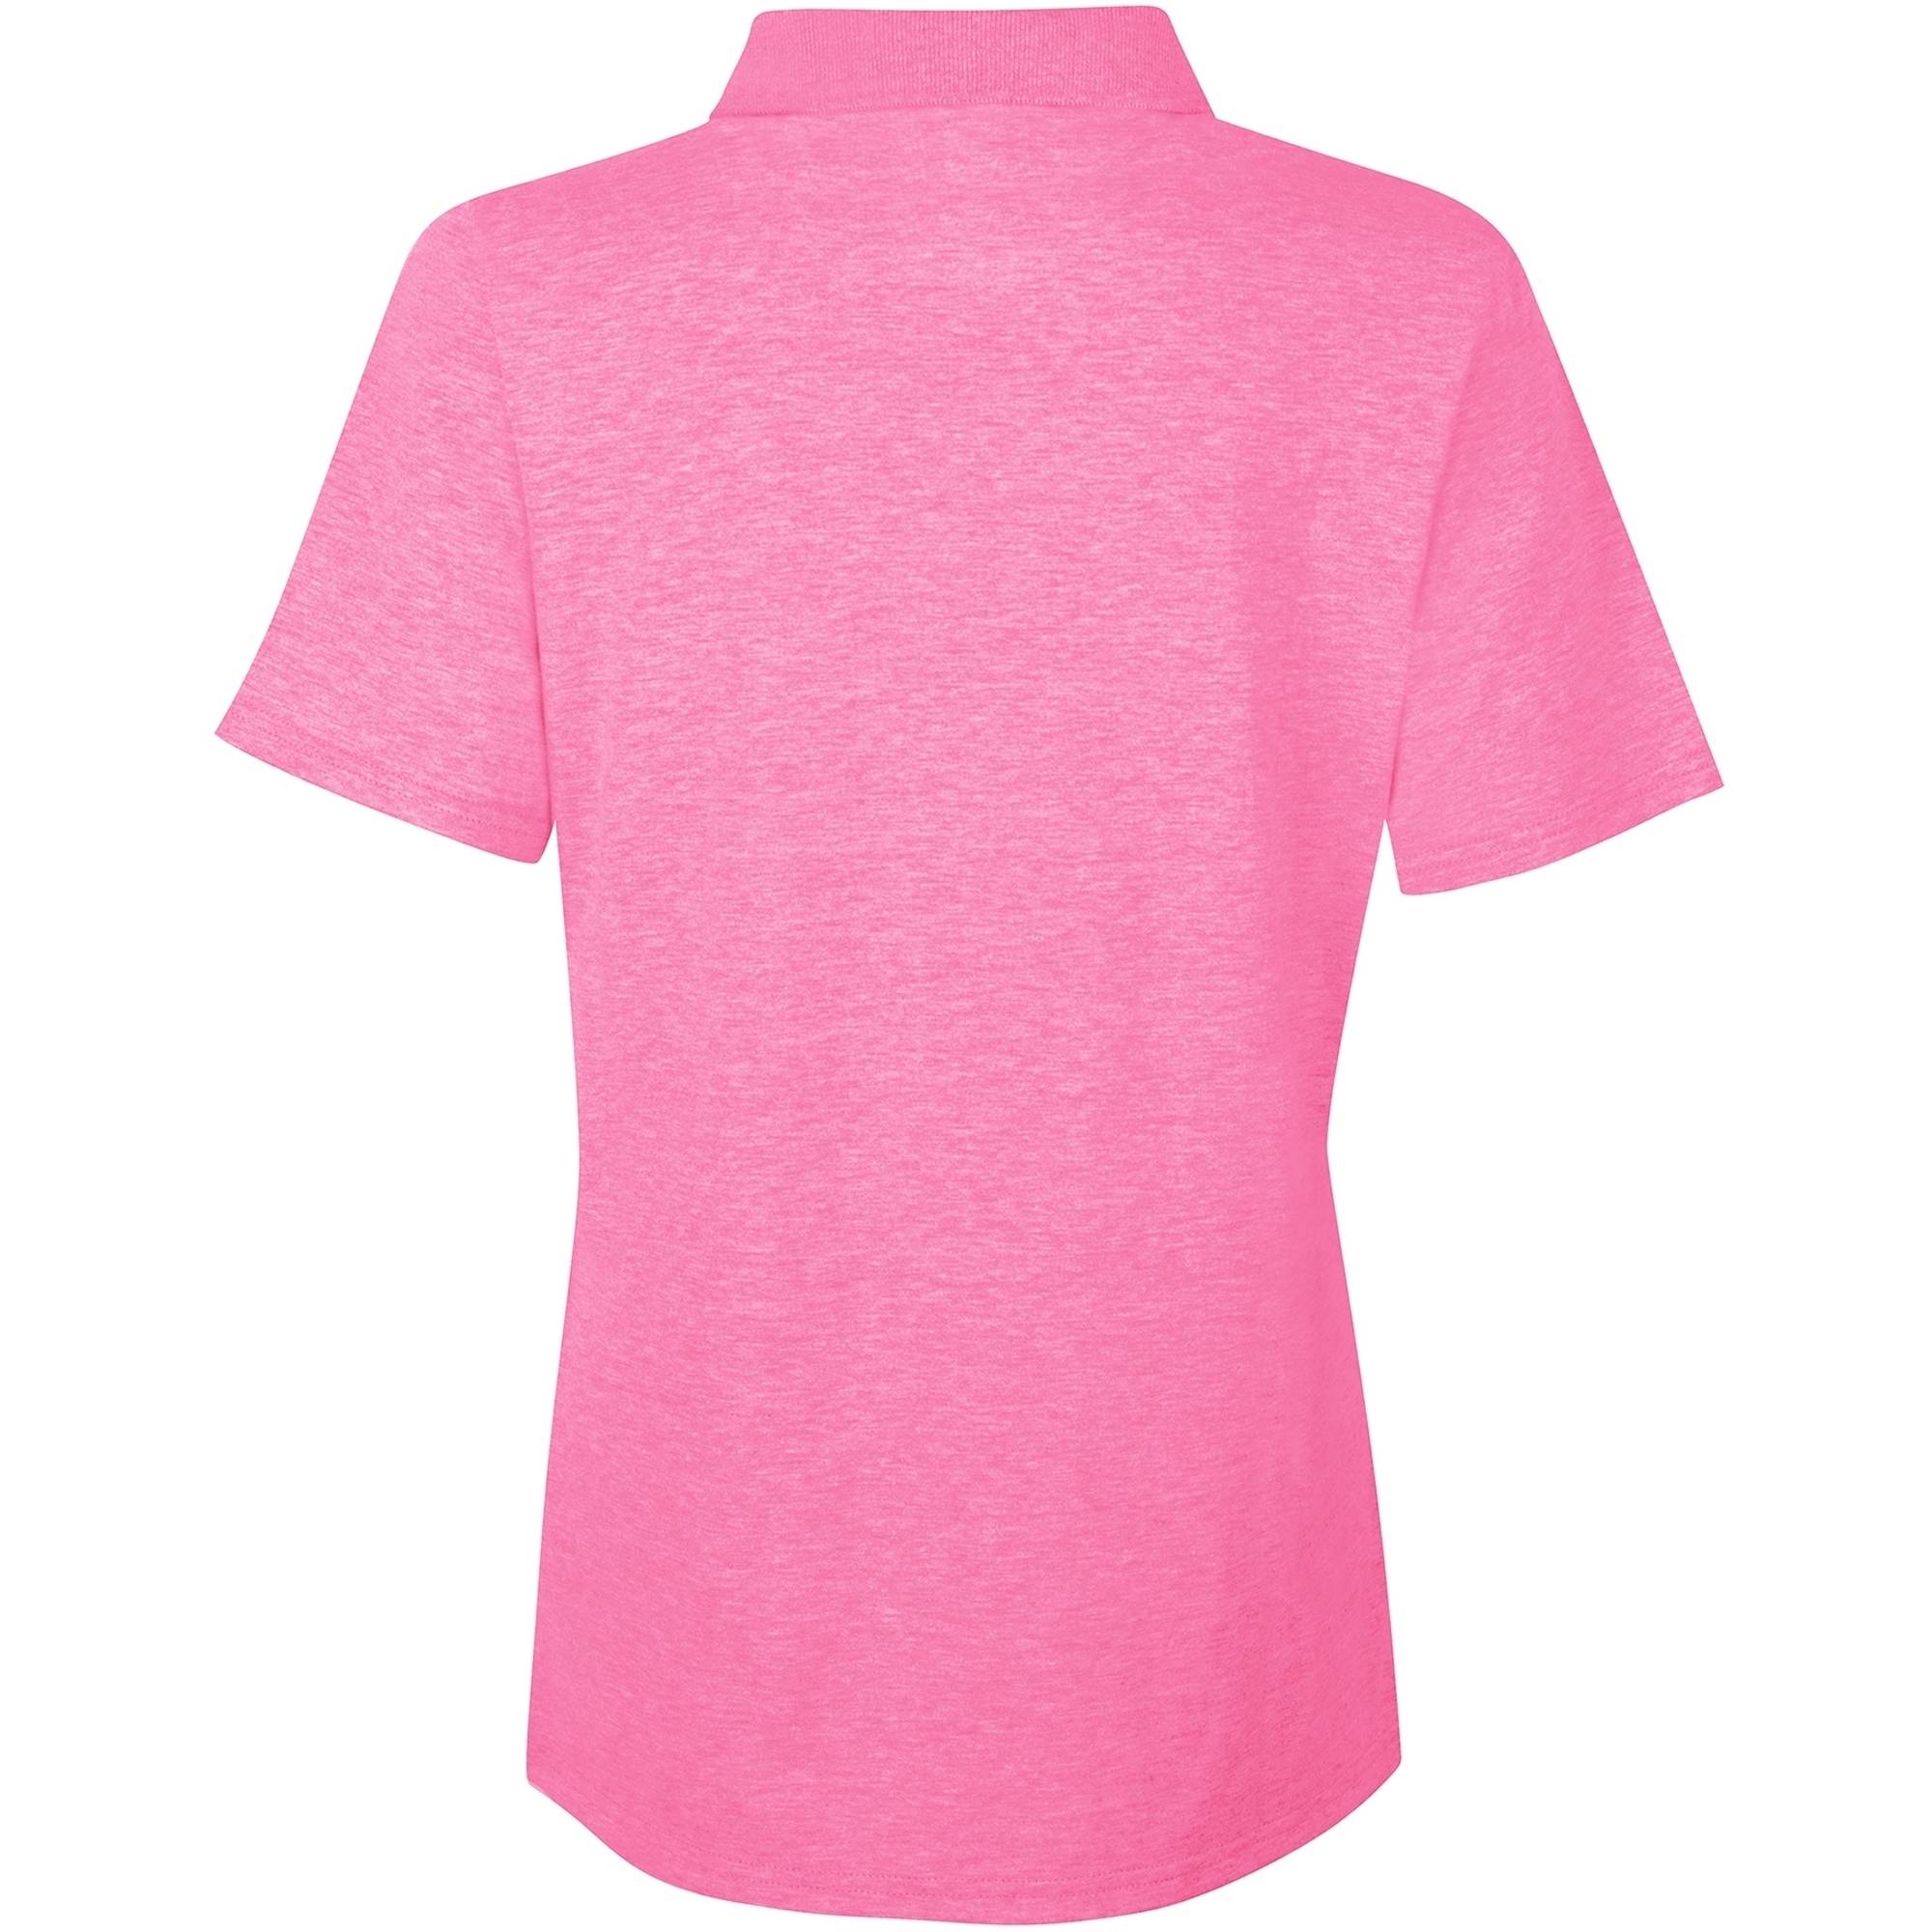 Womens X-temp Polo Sportshirt With Wicking Properties - image 3 of 5